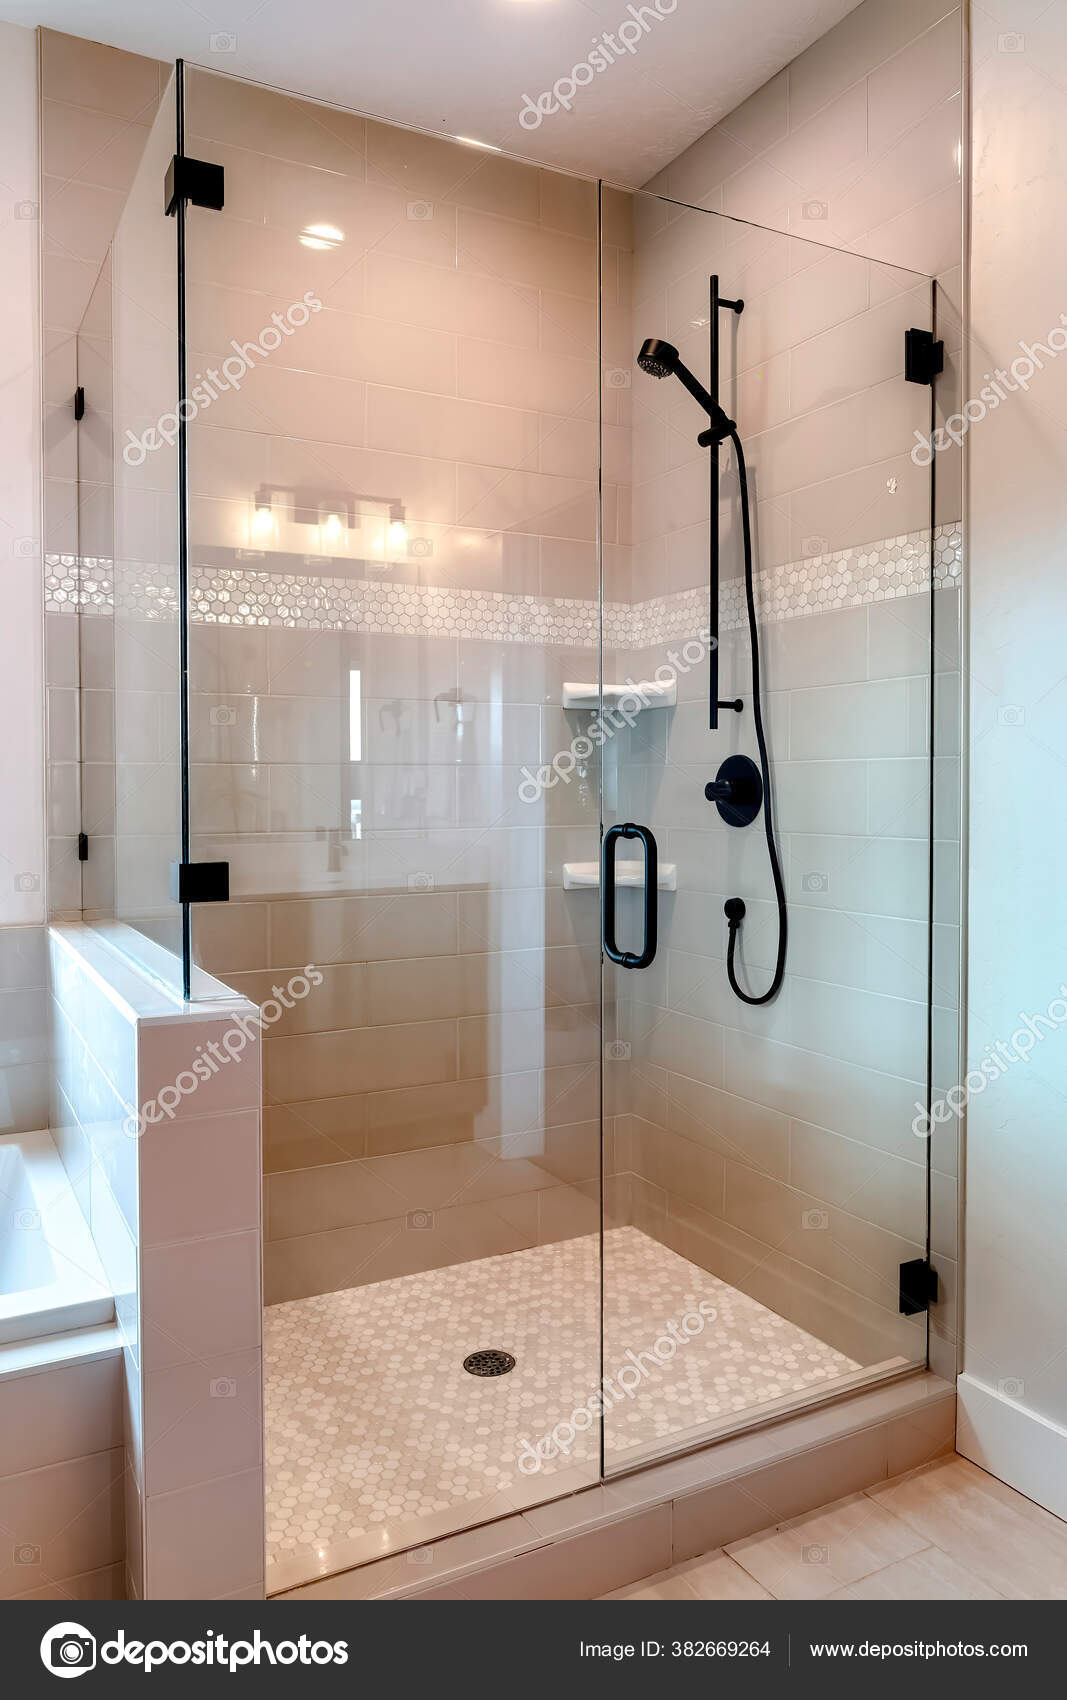 Shower Stall With Half Glass Enclosure, Bathtub With Half Glass